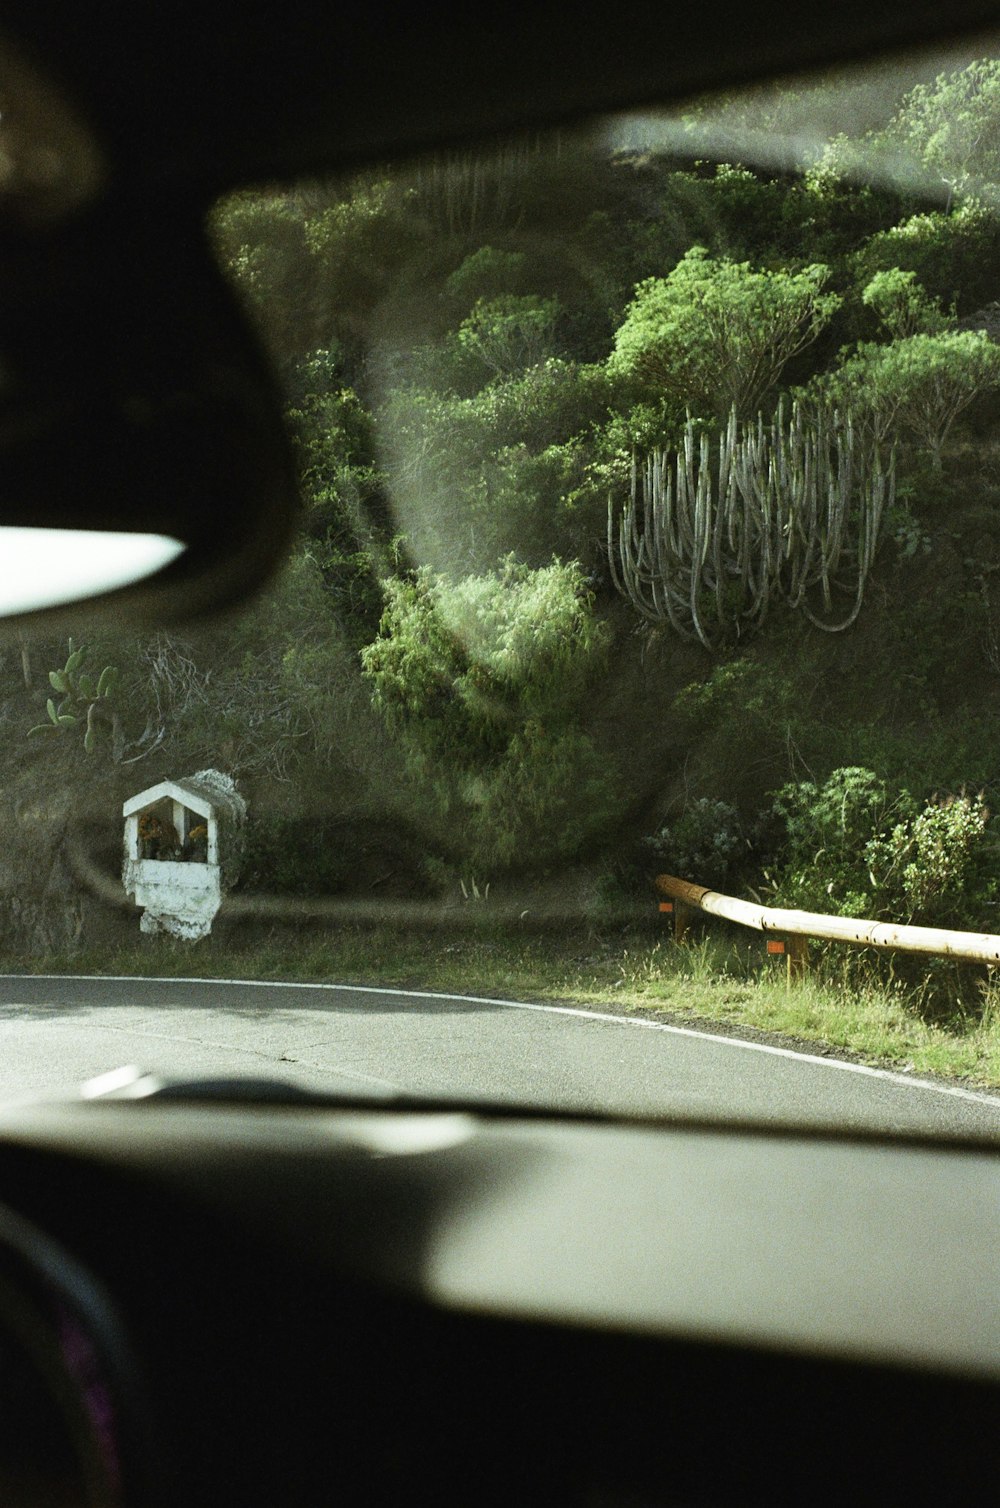 a view from inside a car of a road and trees